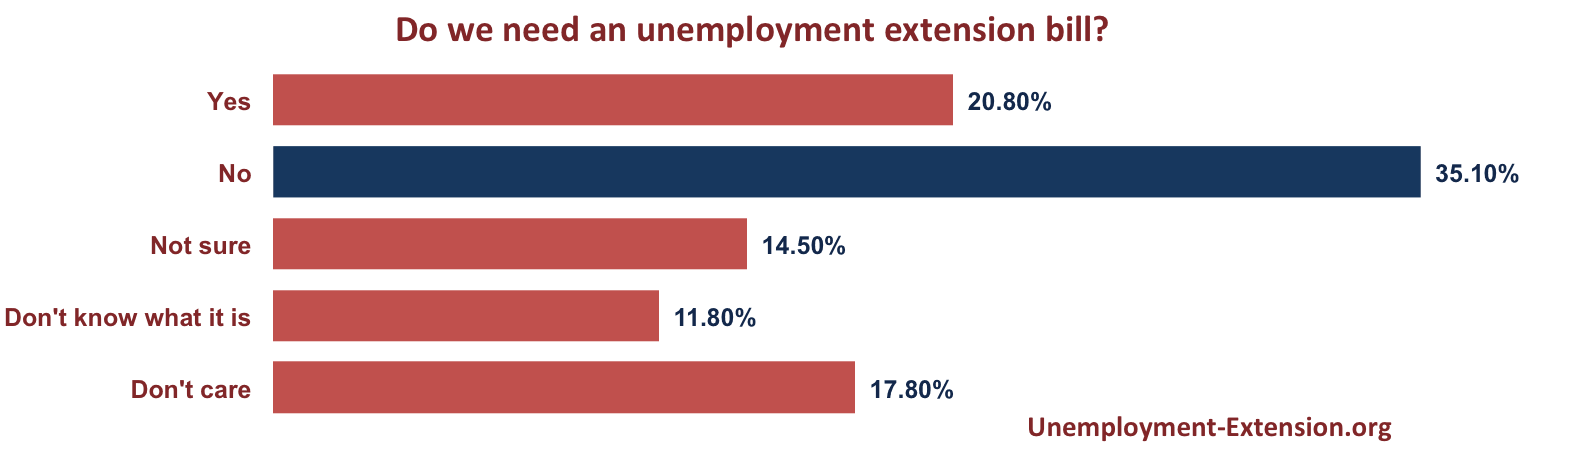 Do we need an unemployment extension bill - US adult internet population survey cunducted on September 12, 2014